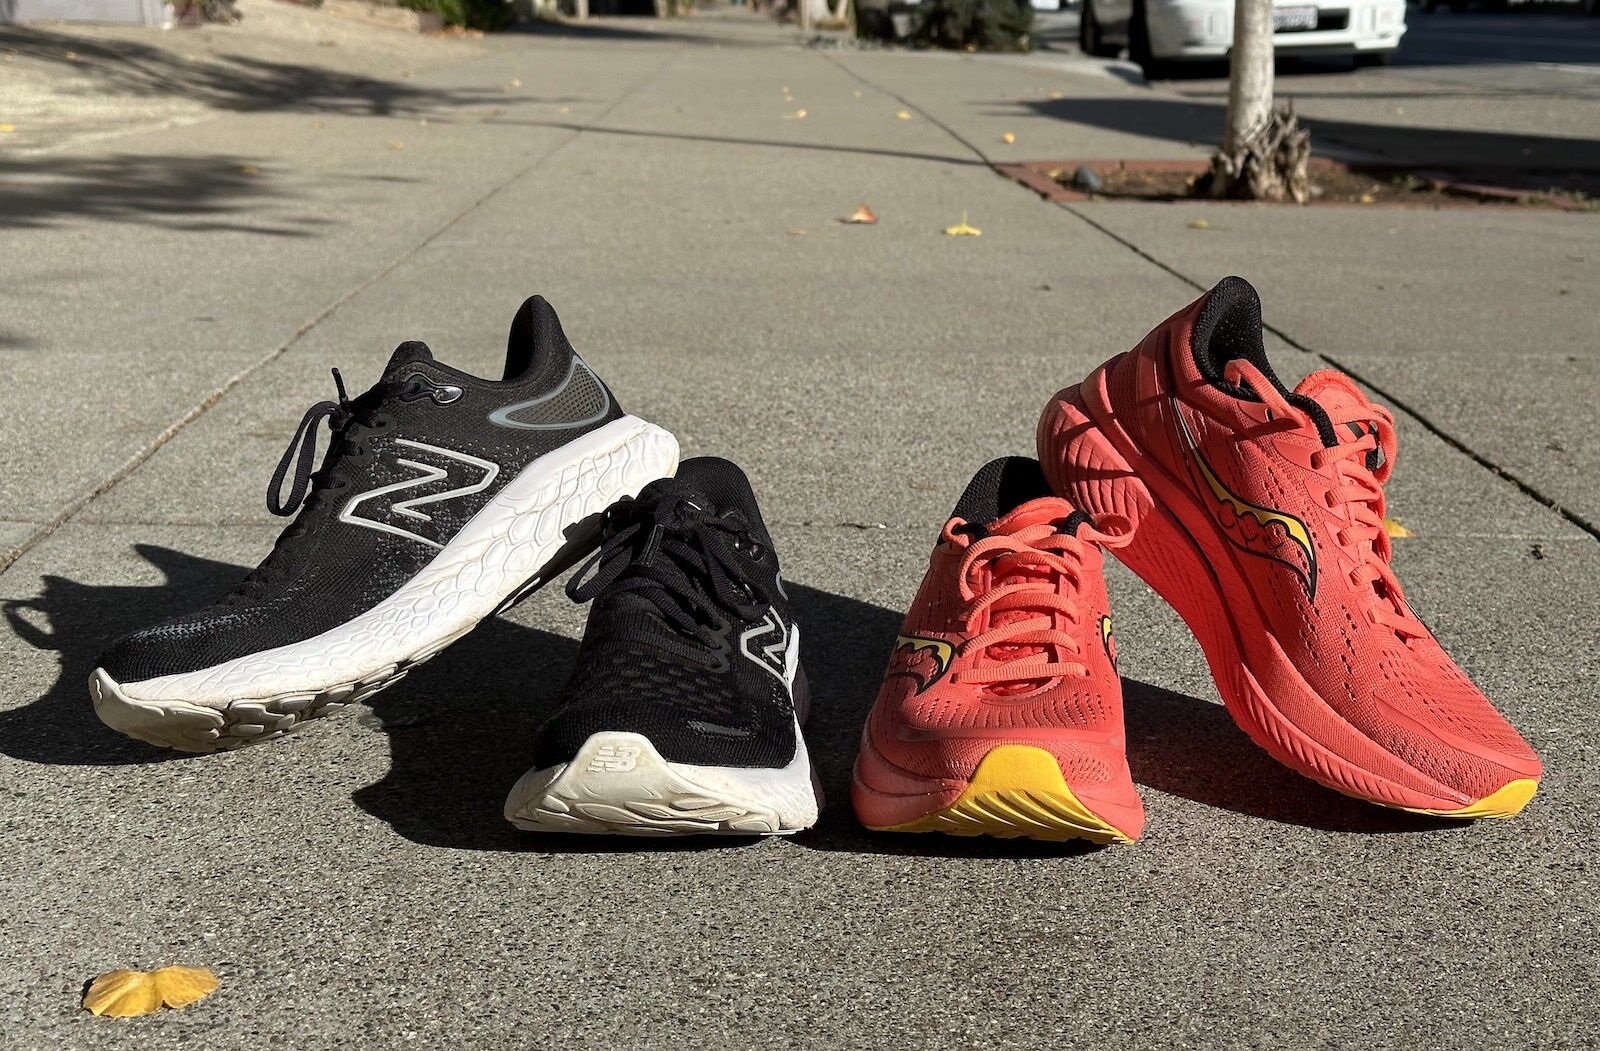 New Balance and Saucony running shoes side by side 